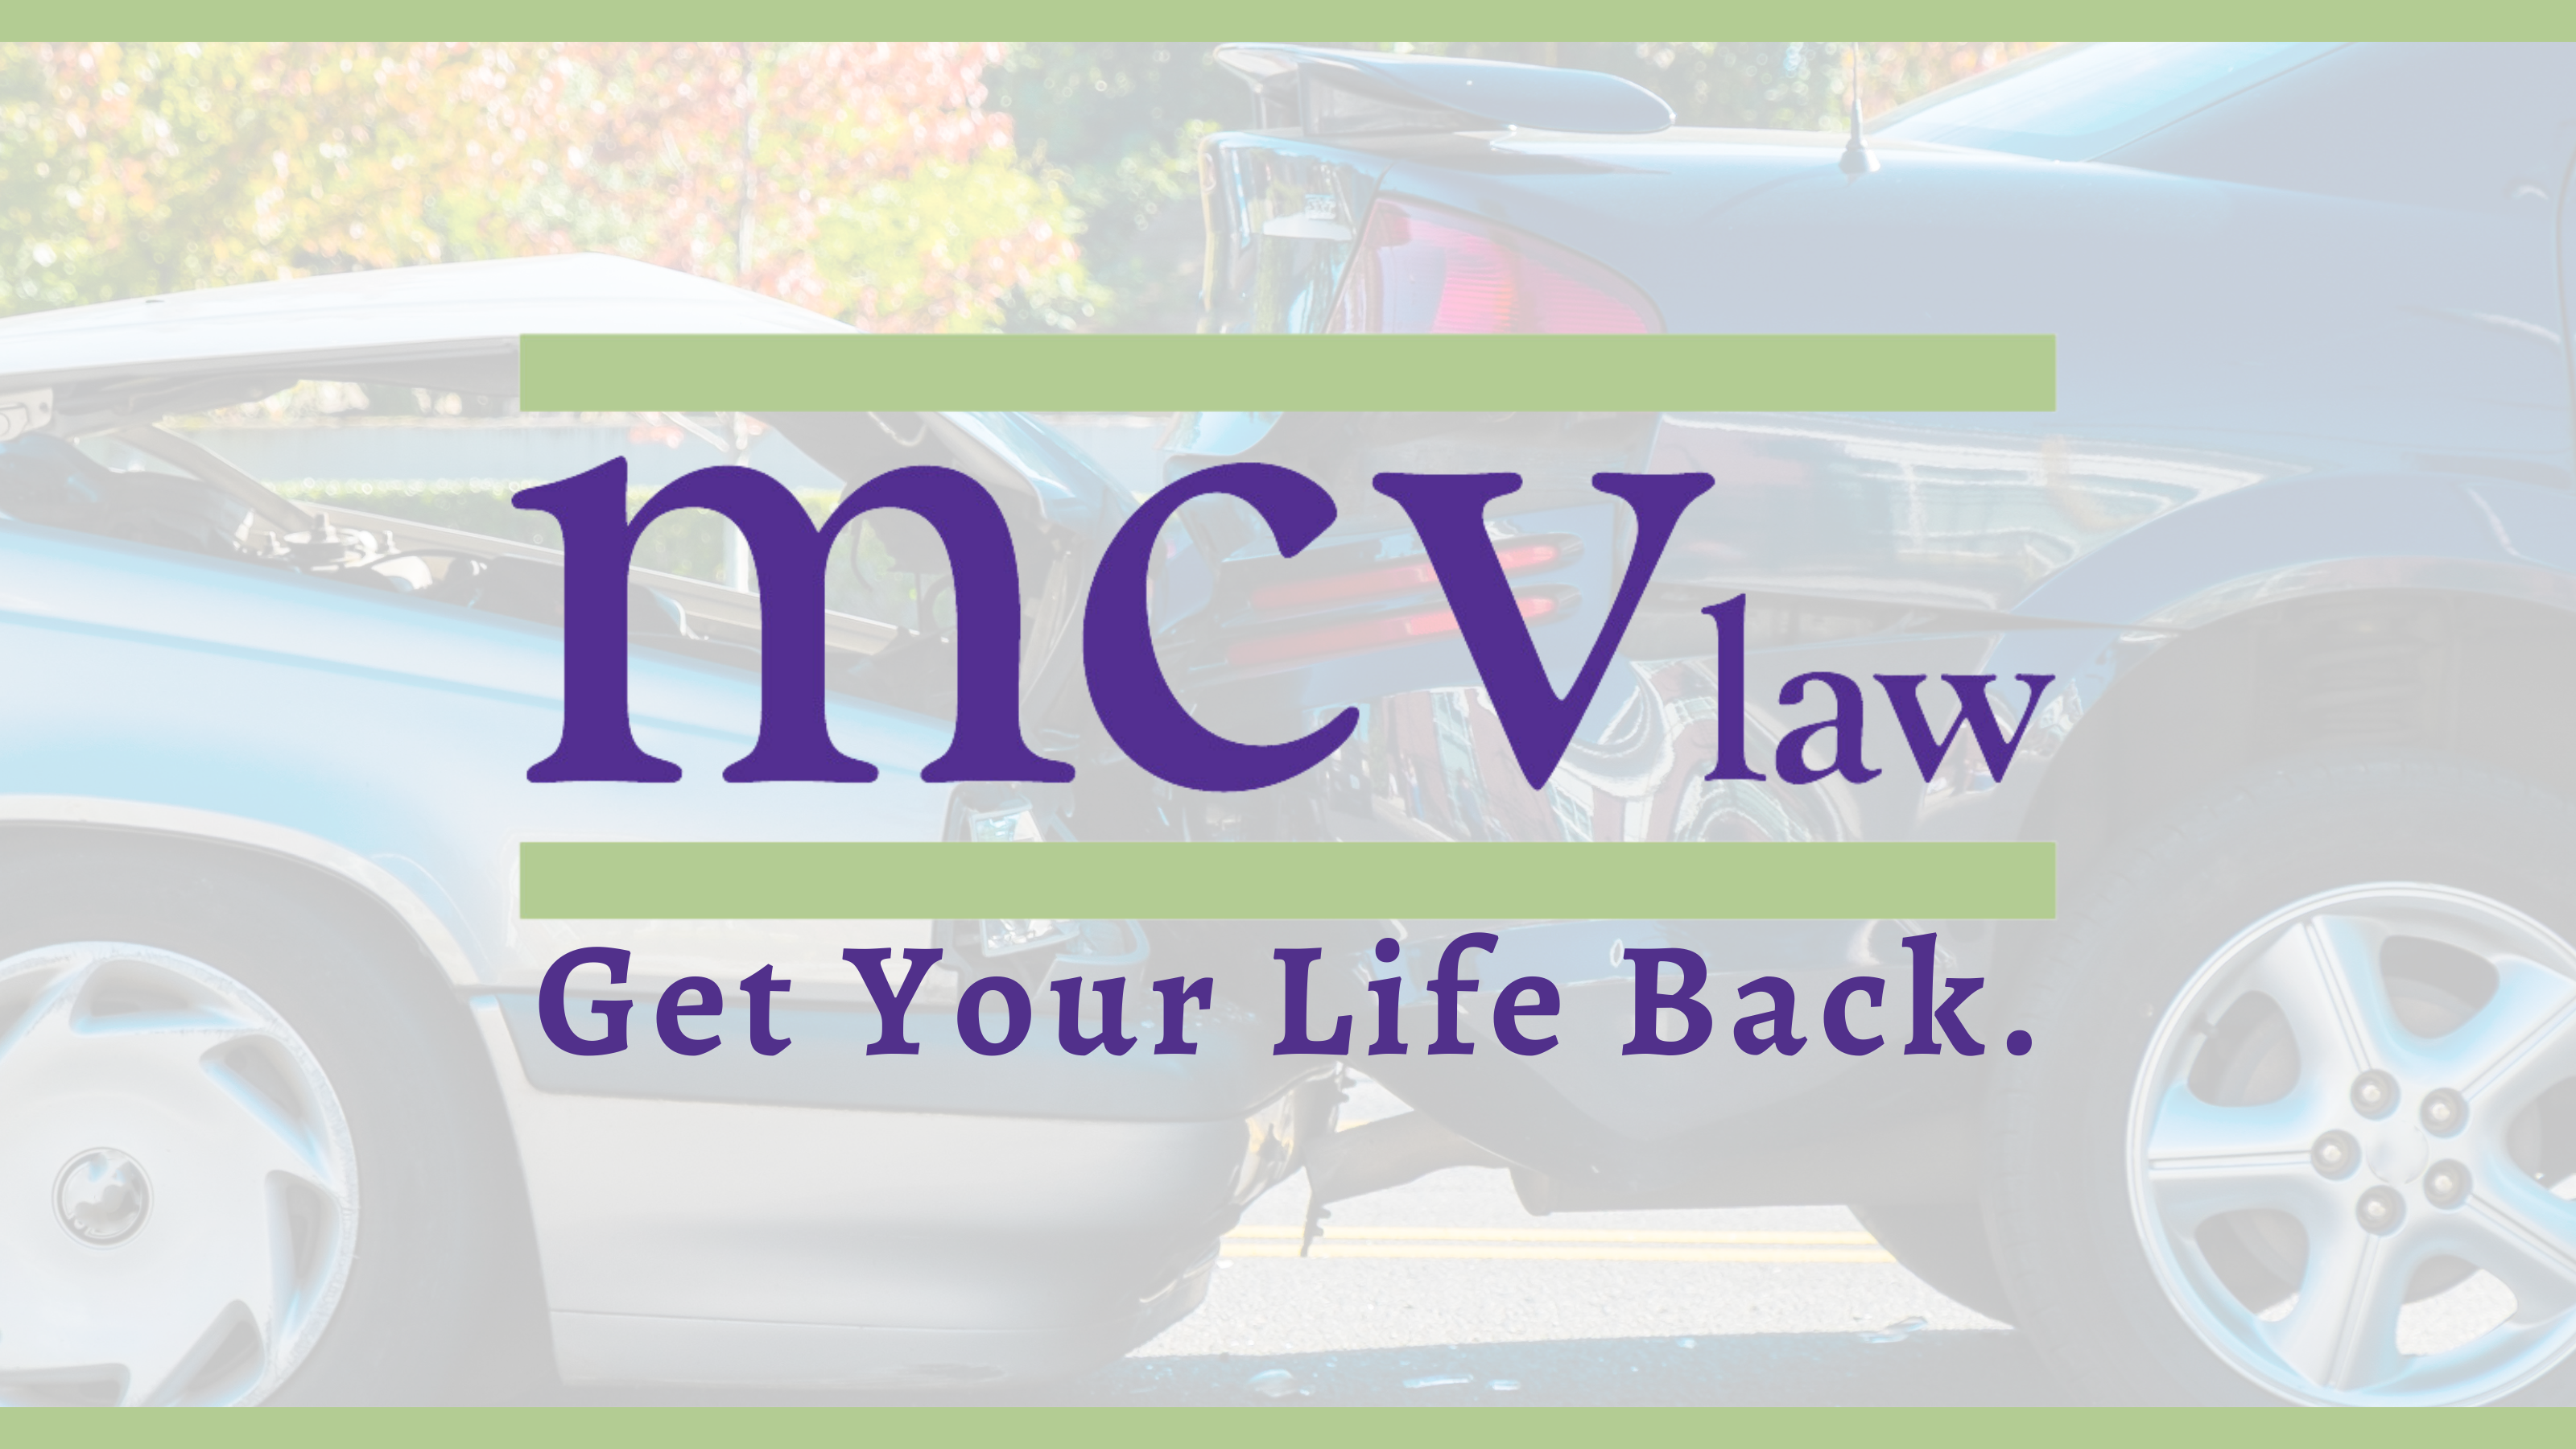 Car Accident Law Firm in Syracuse, NY